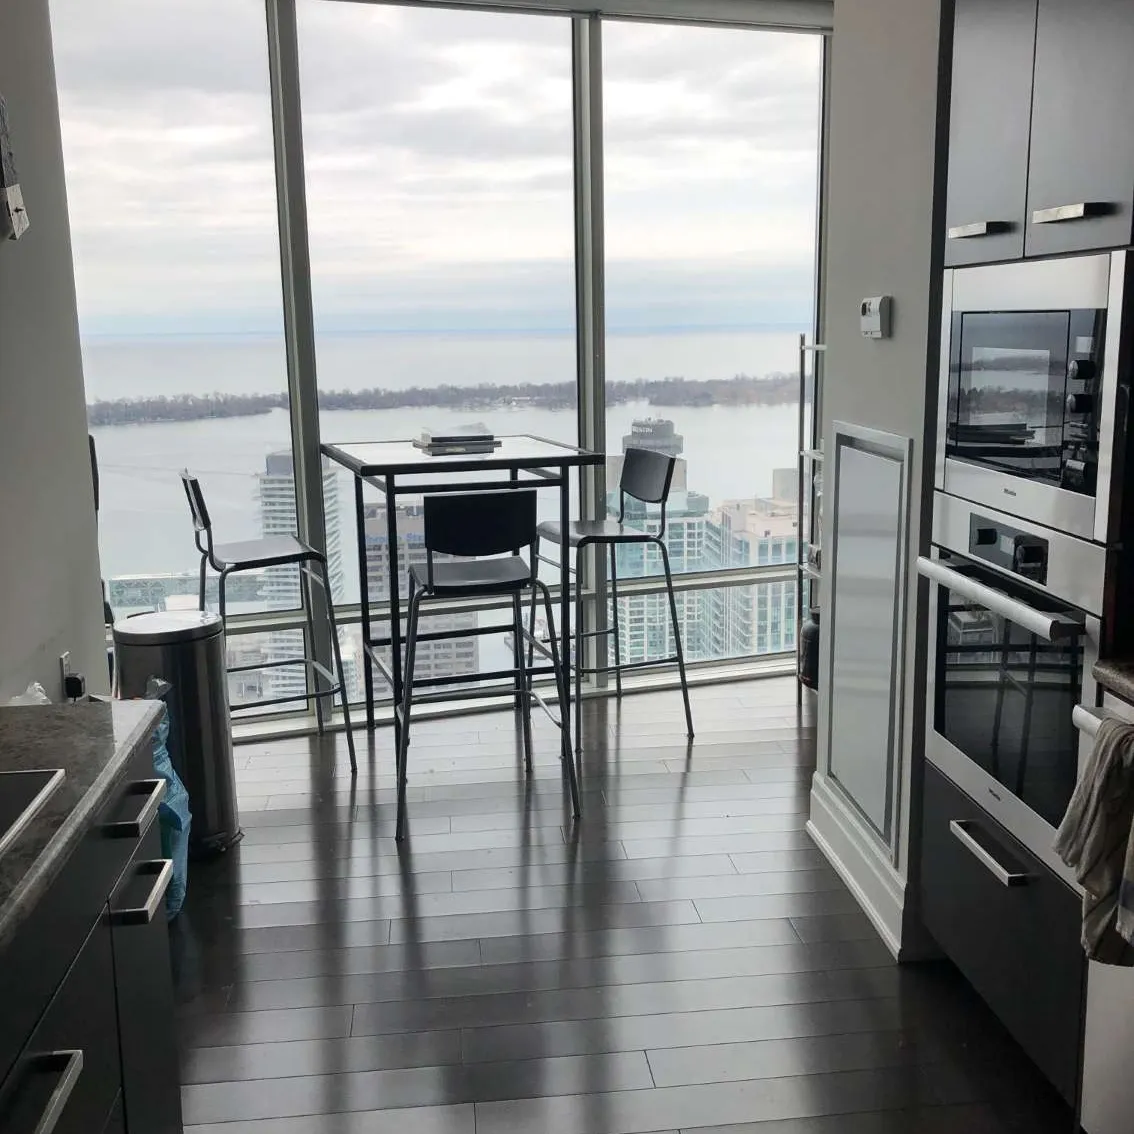 Financial District Condo Room for Rent, $1600/month photo 5